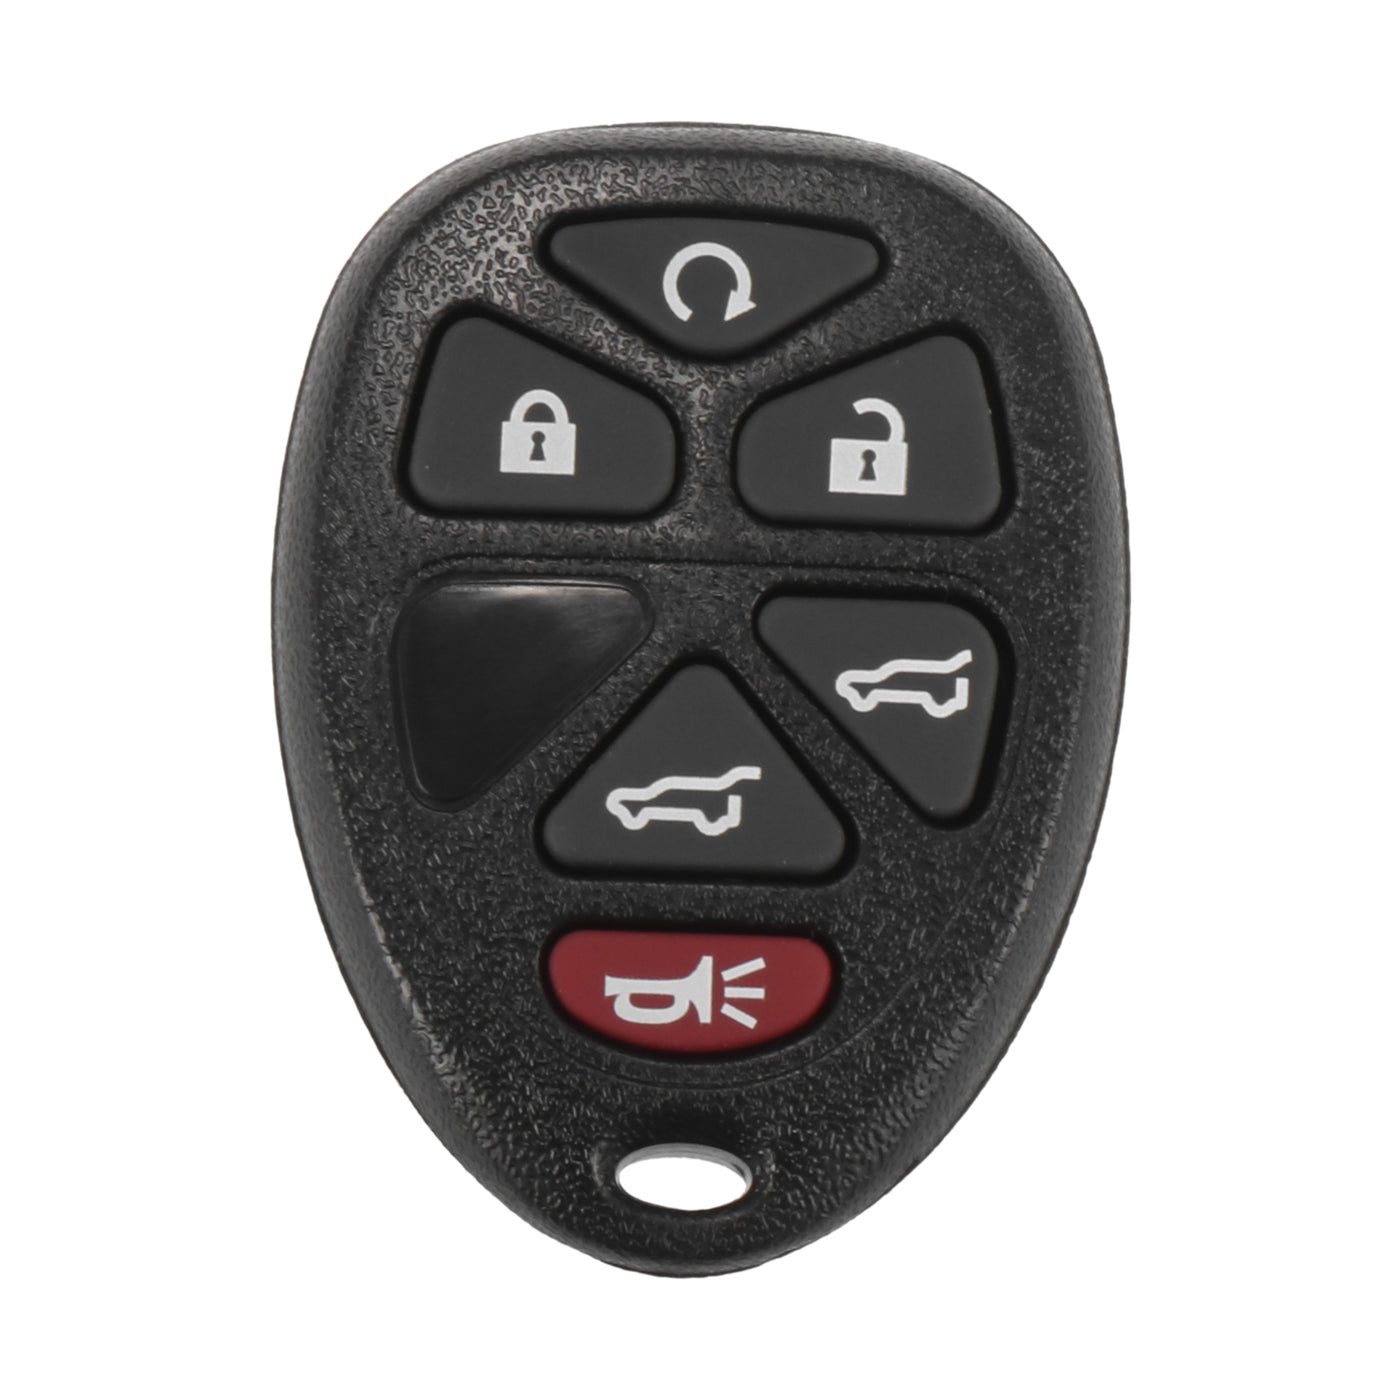 X AUTOHAUX 315MHz OUC60270 15913427 Replacement Keyless Entry Remote Car Key Fob for Chevrolet Suburban for Chevy Tahoe for GMC Yukon for for Cadillac Escalade 2007-2013 6 Buttons